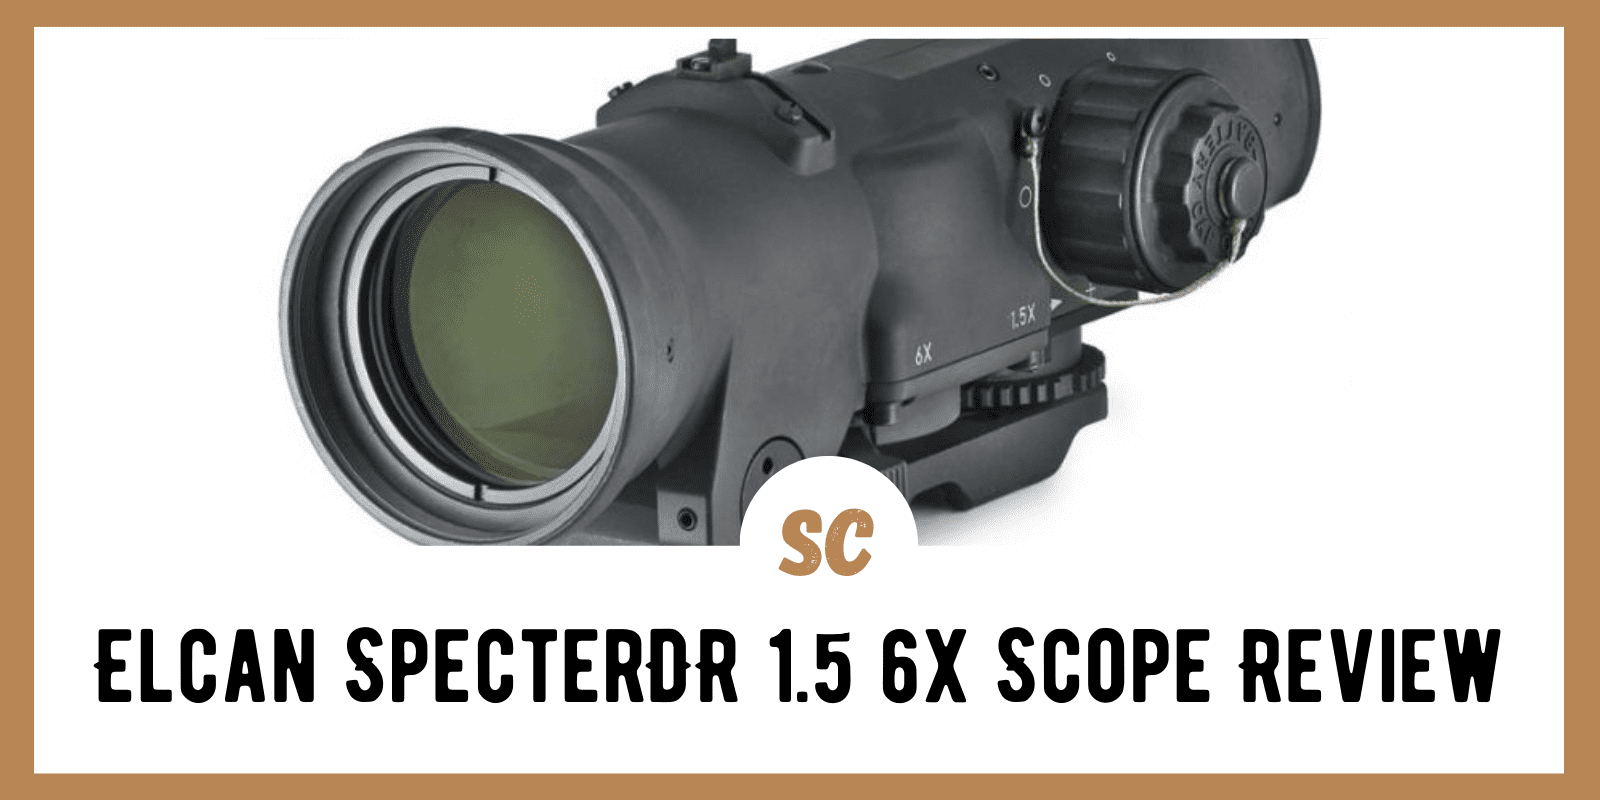 Elcan SpecterDR 1.5 6x Scope: Detailed Review